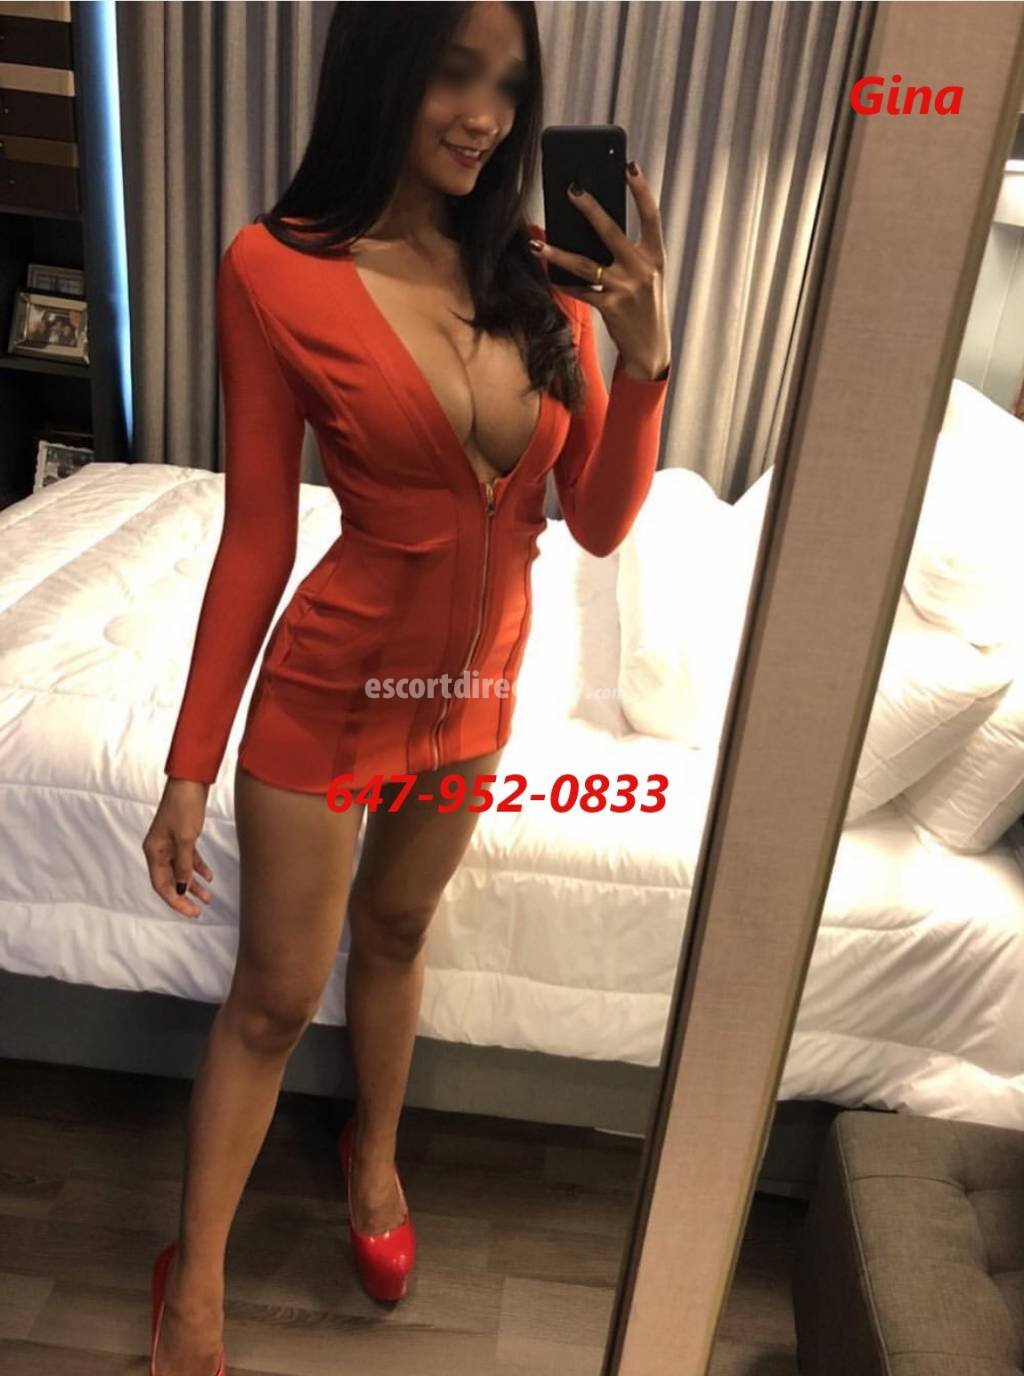 Gina Super Busty
 escort in Toronto offers Intimate shaving services